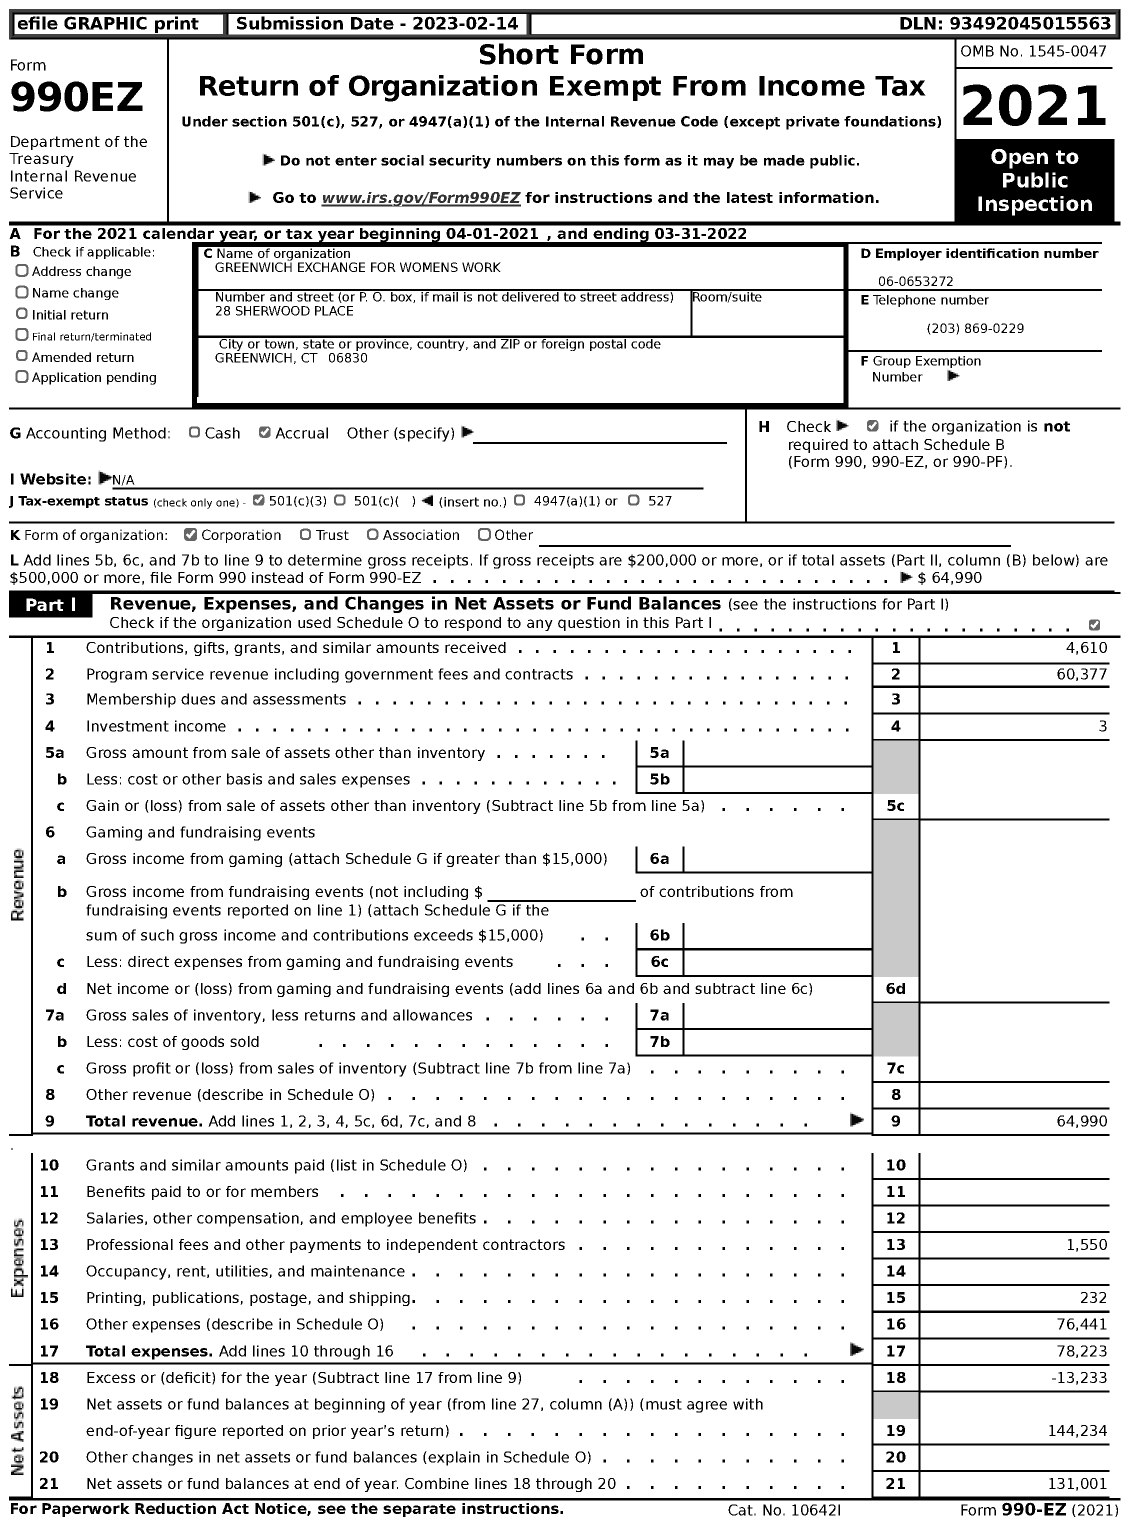 Image of first page of 2021 Form 990EZ for Greenwich Exchange for Womens Work